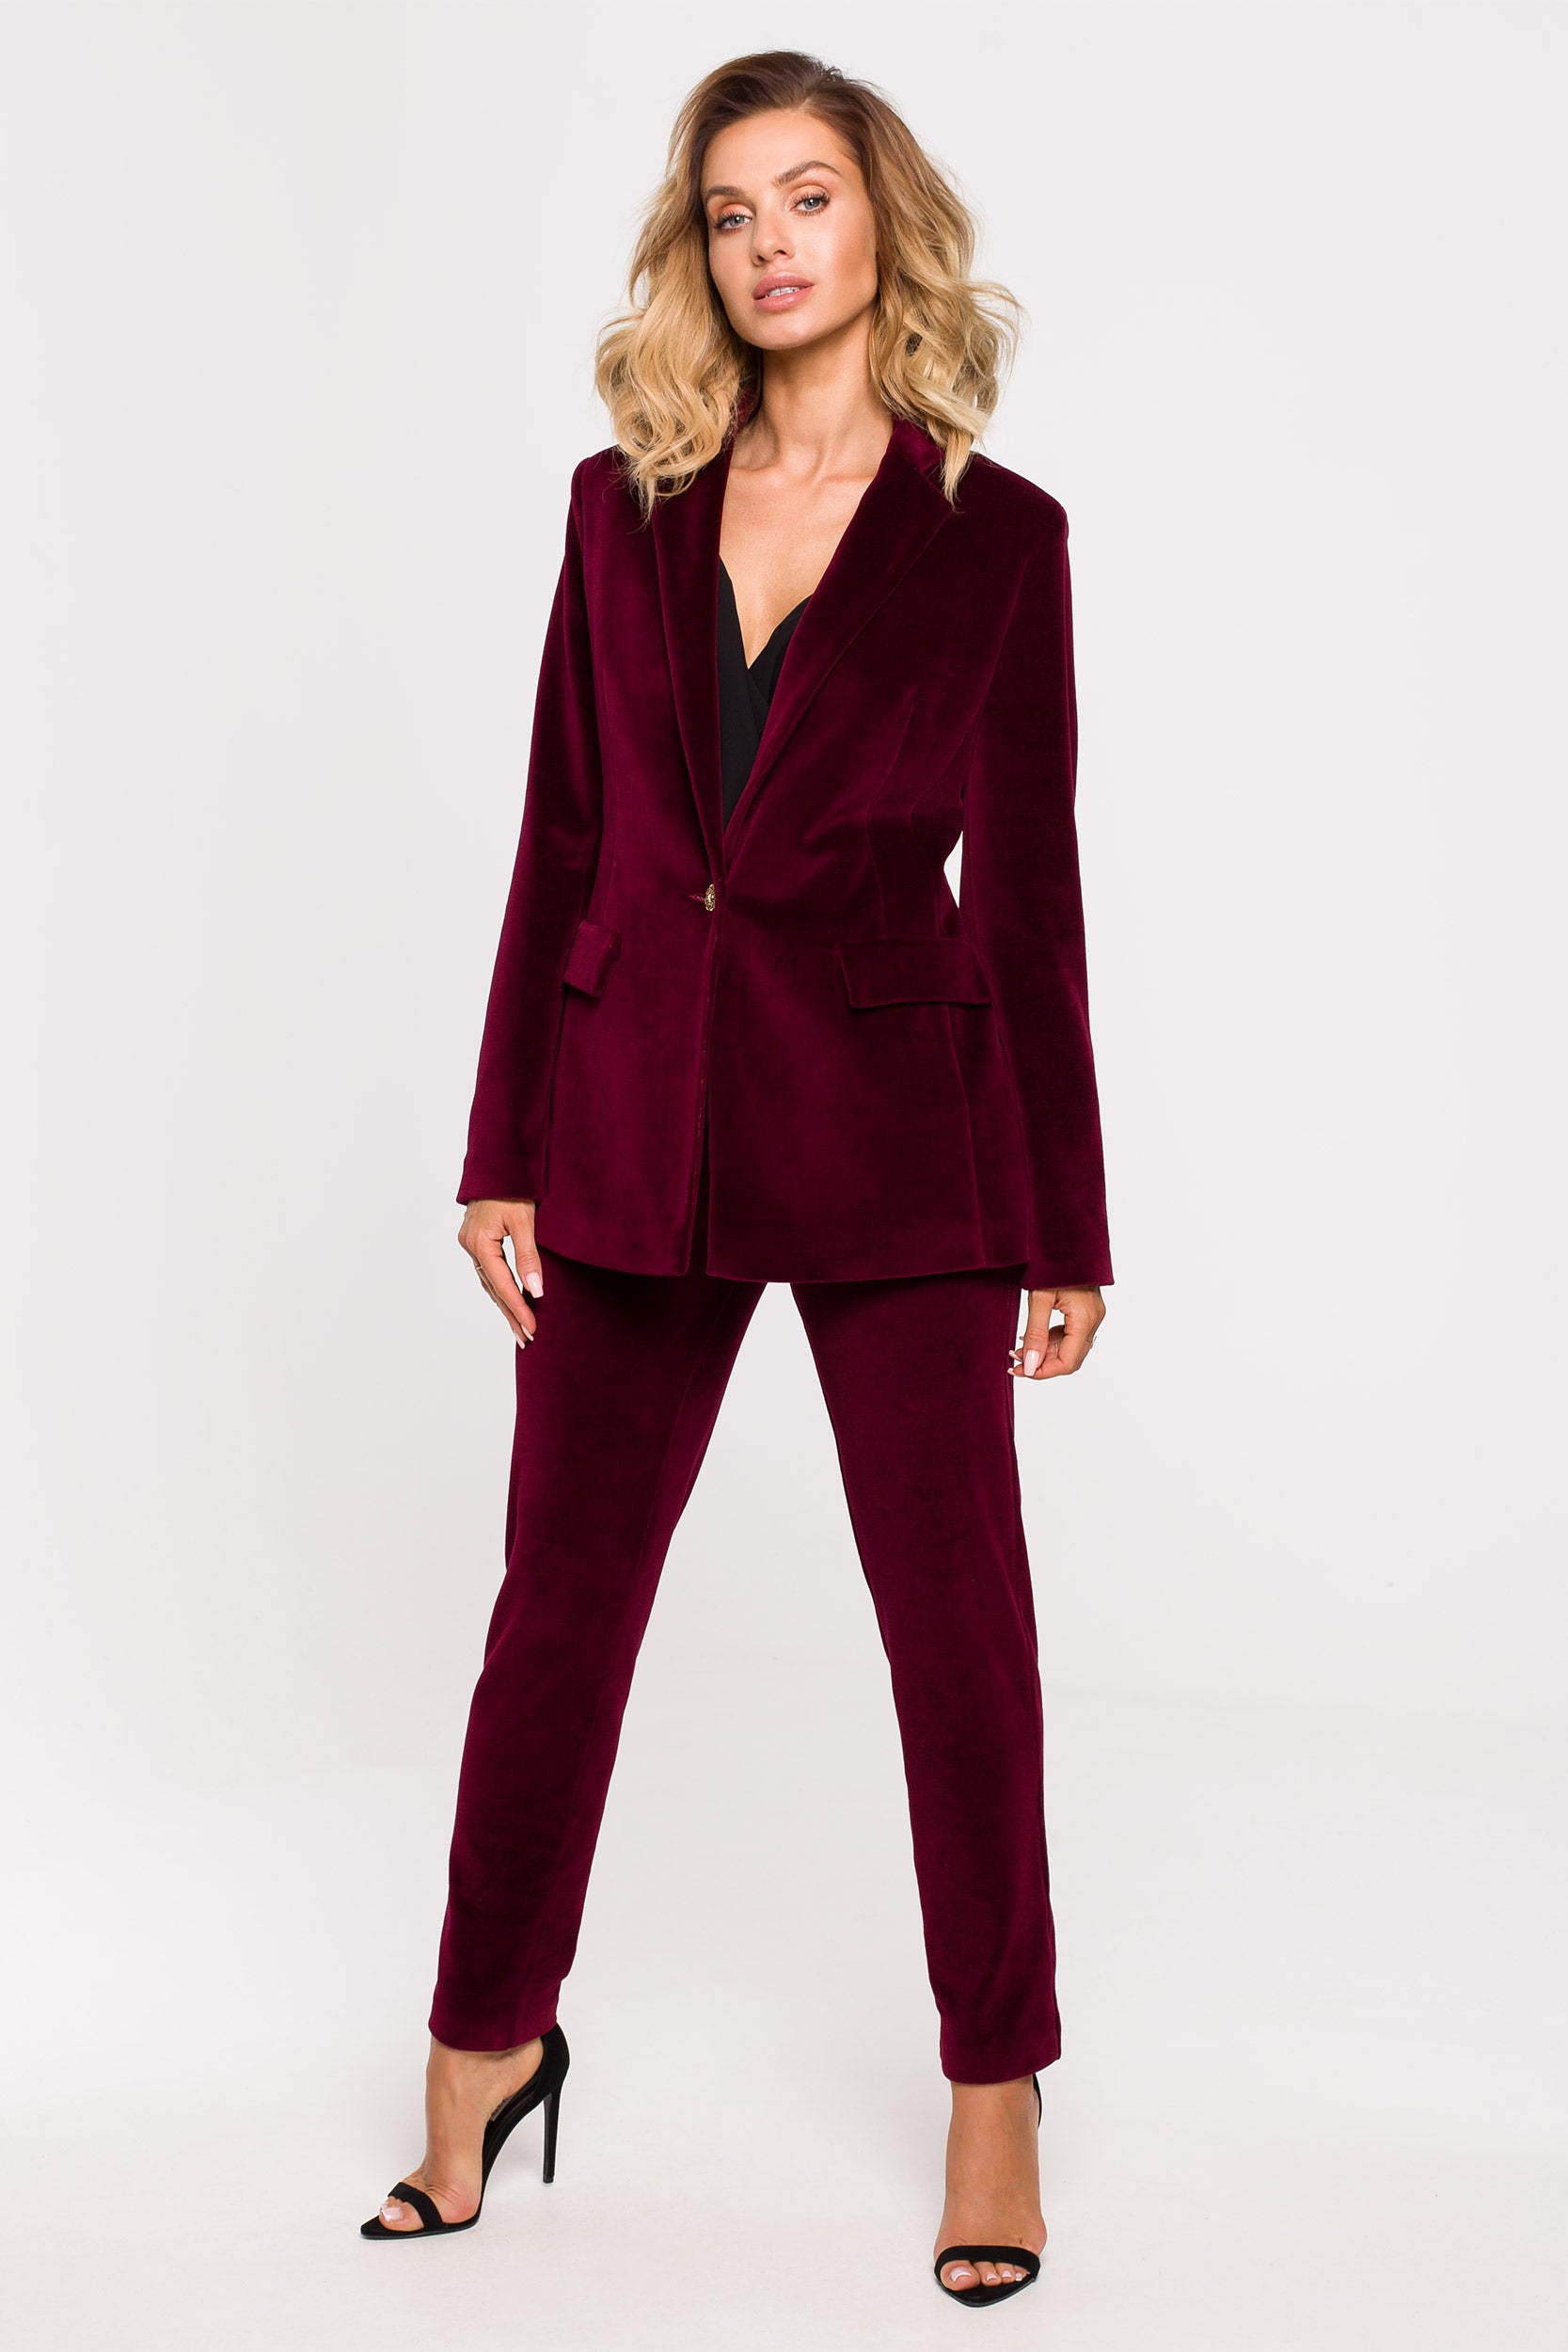 Formal Pantsuit for Business Women, Tall Women Pants and Blazer Suit,  3-piece Women's Pantsuit for Special Events, Office Wear Womens - Etsy